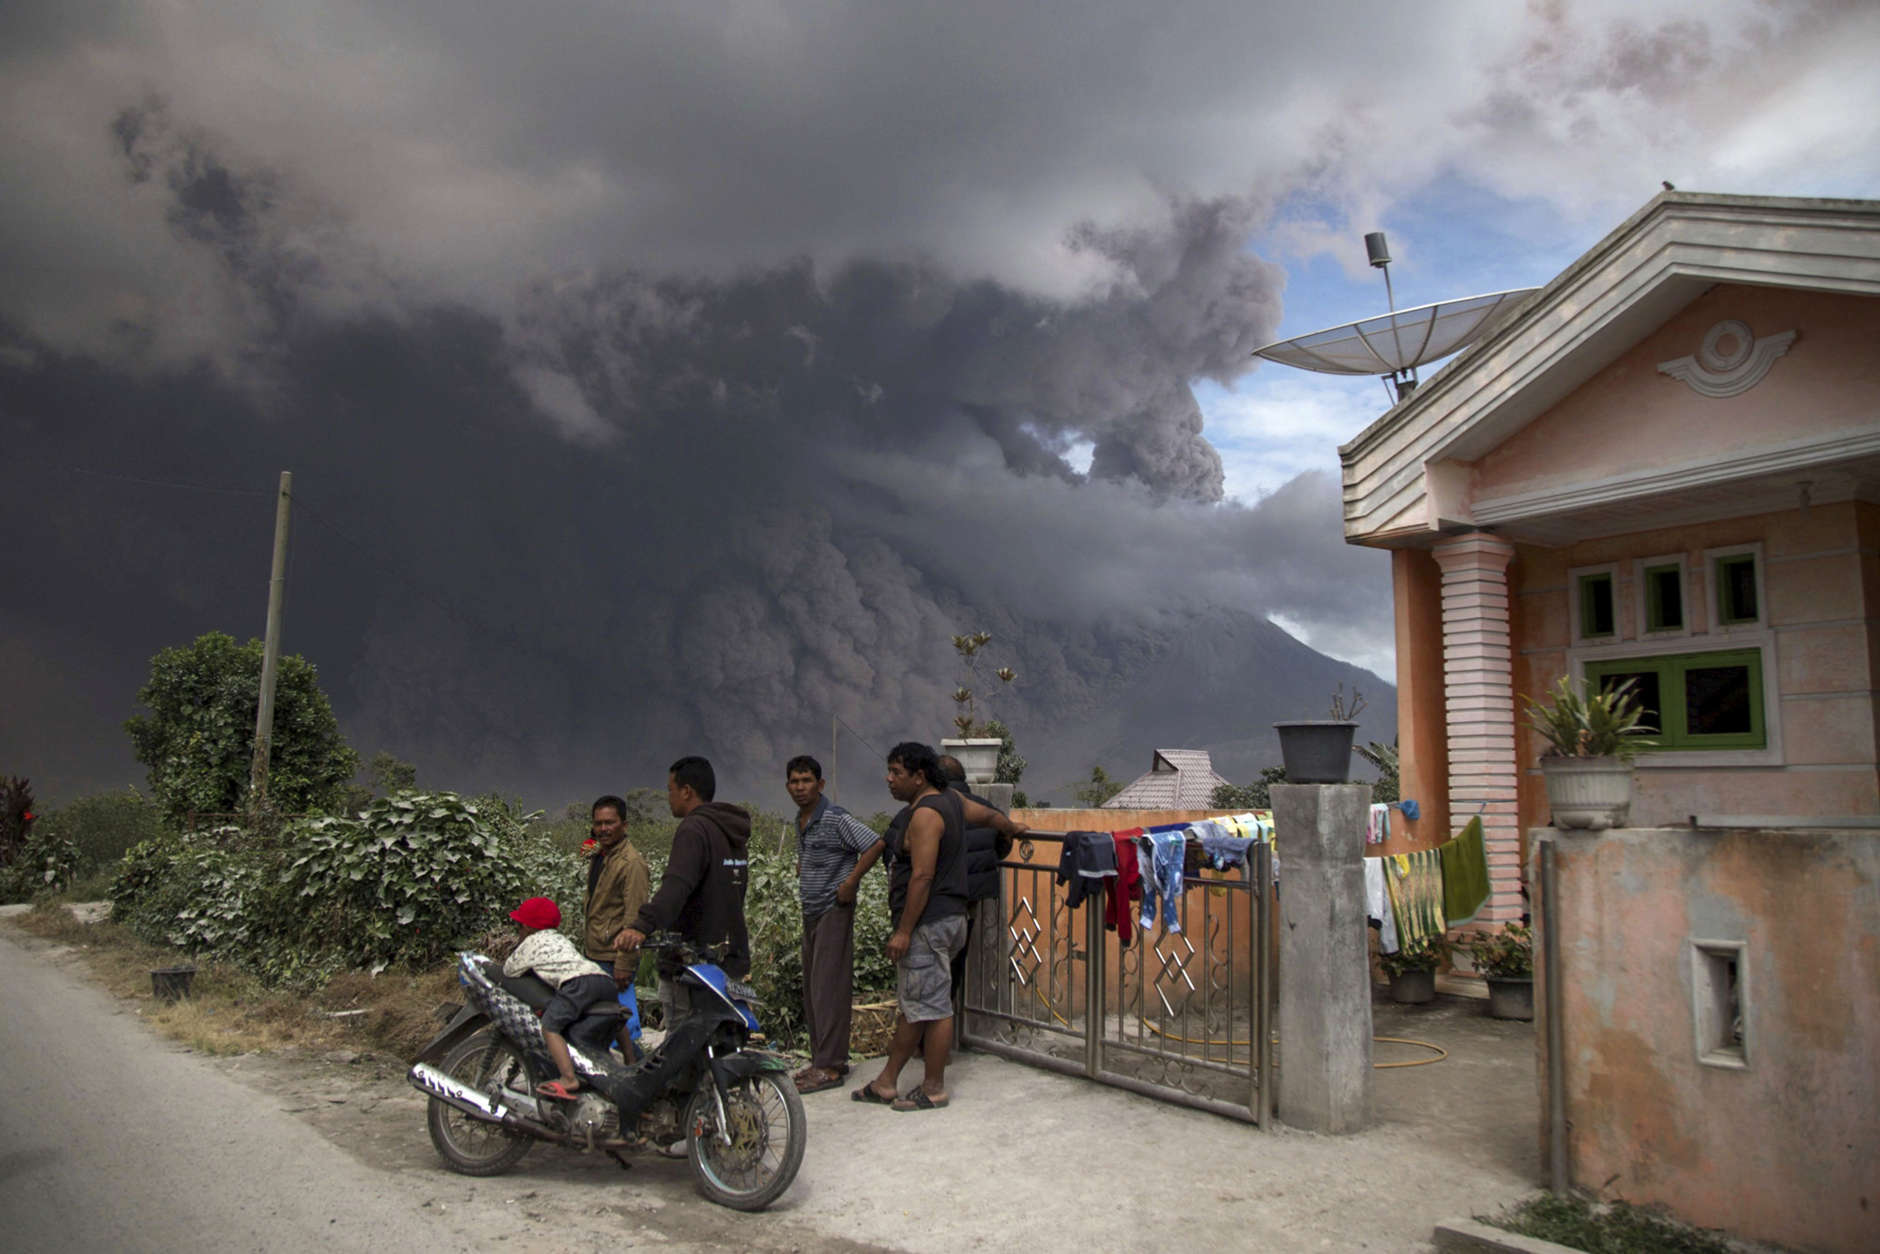 Villagers gather in front of a house as they watch Mount Sinabung releasing a pyroclastic flow during its eruption in Karo, North Sumatra, Indonesia, Wednesday, Aug. 2, 2017. The volcano blasted volcanic ash as high as 4.2 kilometers (2.6 miles), one of its biggest eruptions in the past several months of high activity. (AP Photo/Endro Rusharyanto)